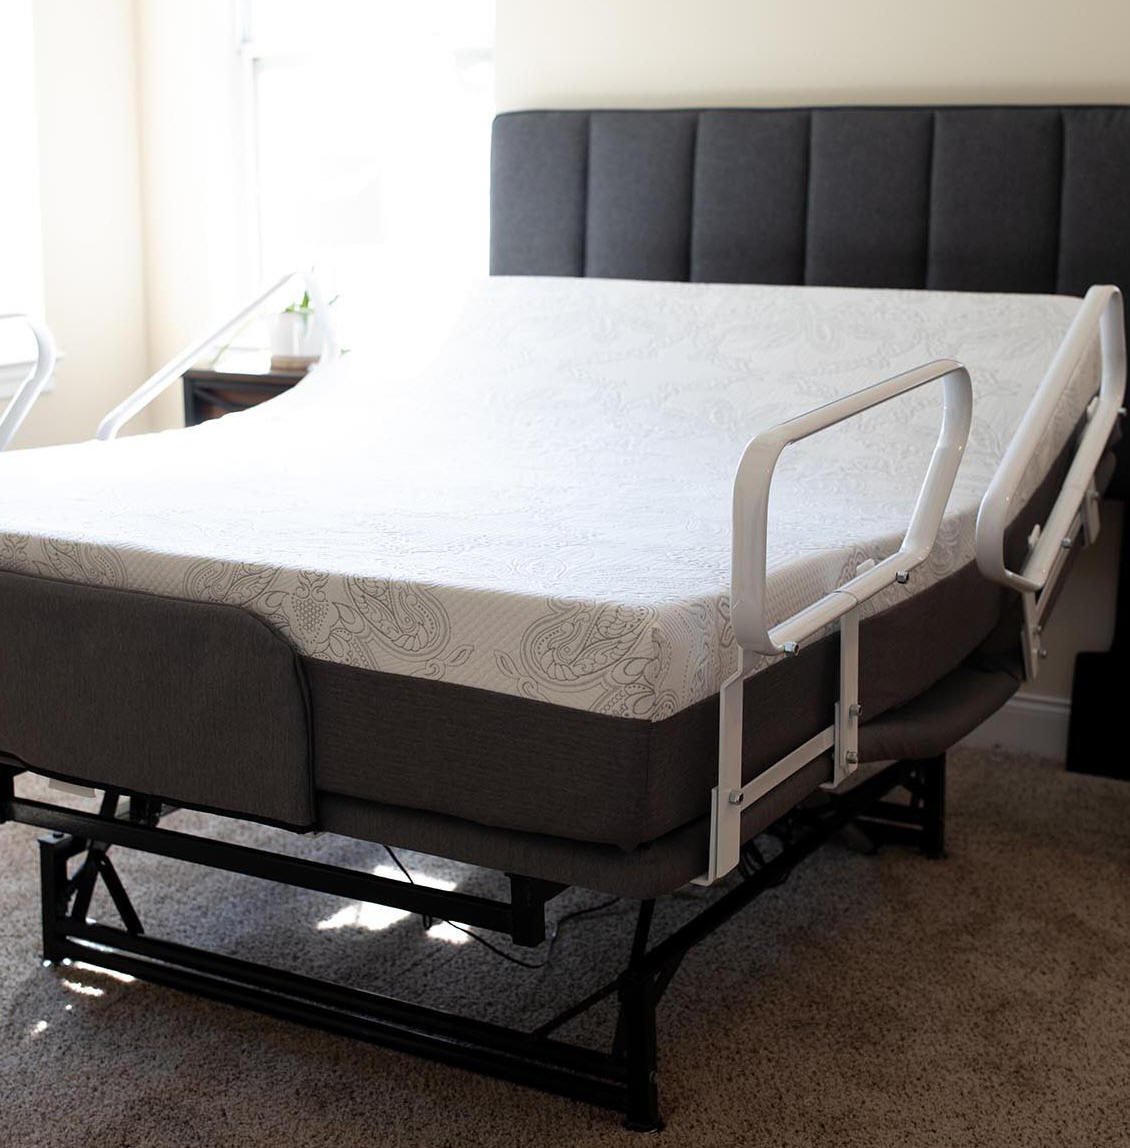 Flexabed 3 motor deluxe high low hospital bed flex-a-bed